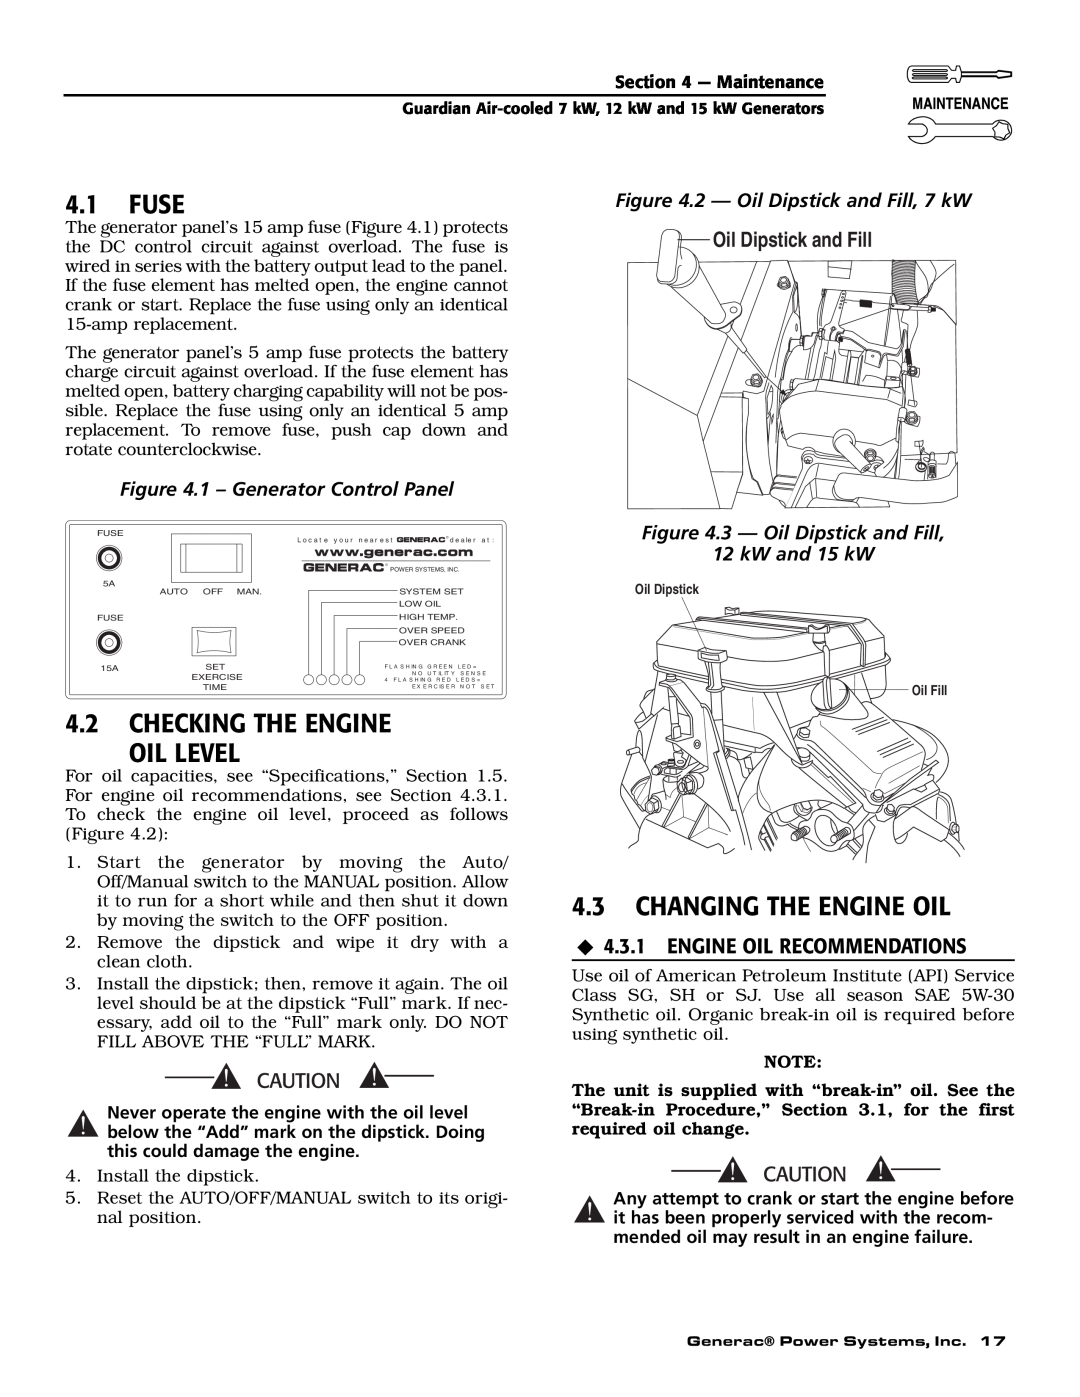 Generac Power Systems 04758-1, 04759-1, 04760-1 owner manual Fuse, Checking The Engine Oil Level, Changing The Engine Oil 